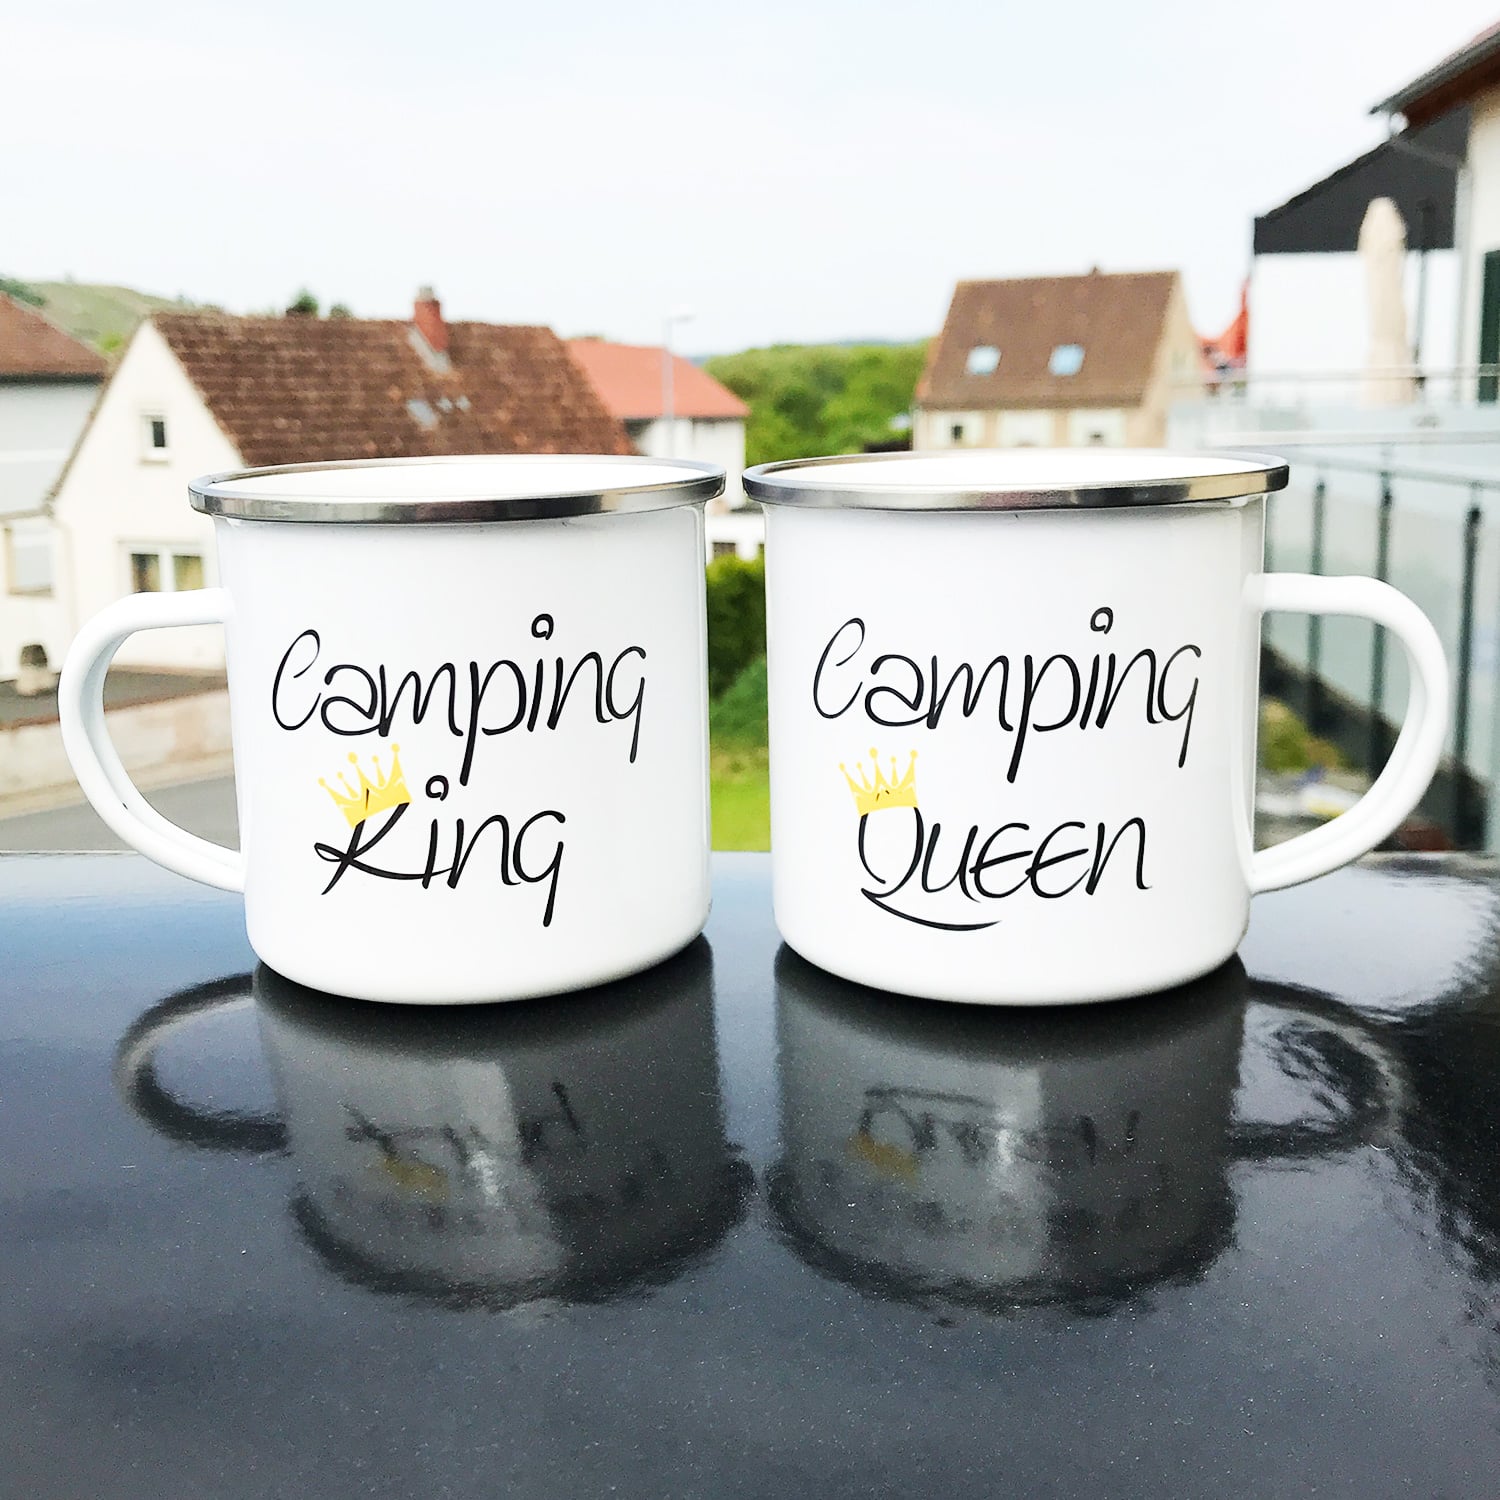 Camping Tasse mit Motive CAMPING QUEEN und CAMPING KING